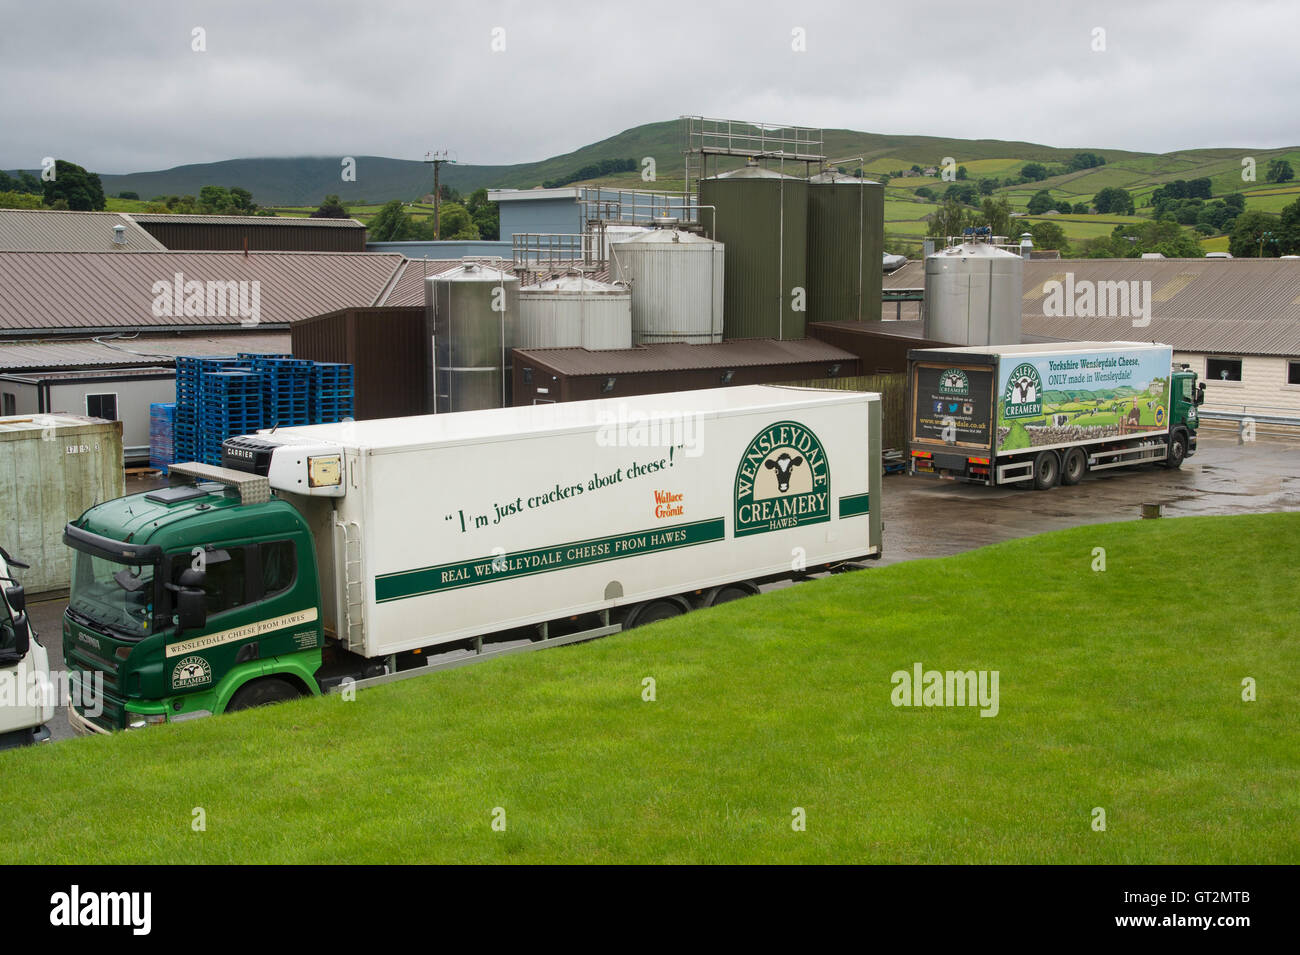 In the rain, 2 lorries with logos, parked outside the cheese factory - Wensleydale Creamery, Hawes, Yorkshire Dales, England. Stock Photo